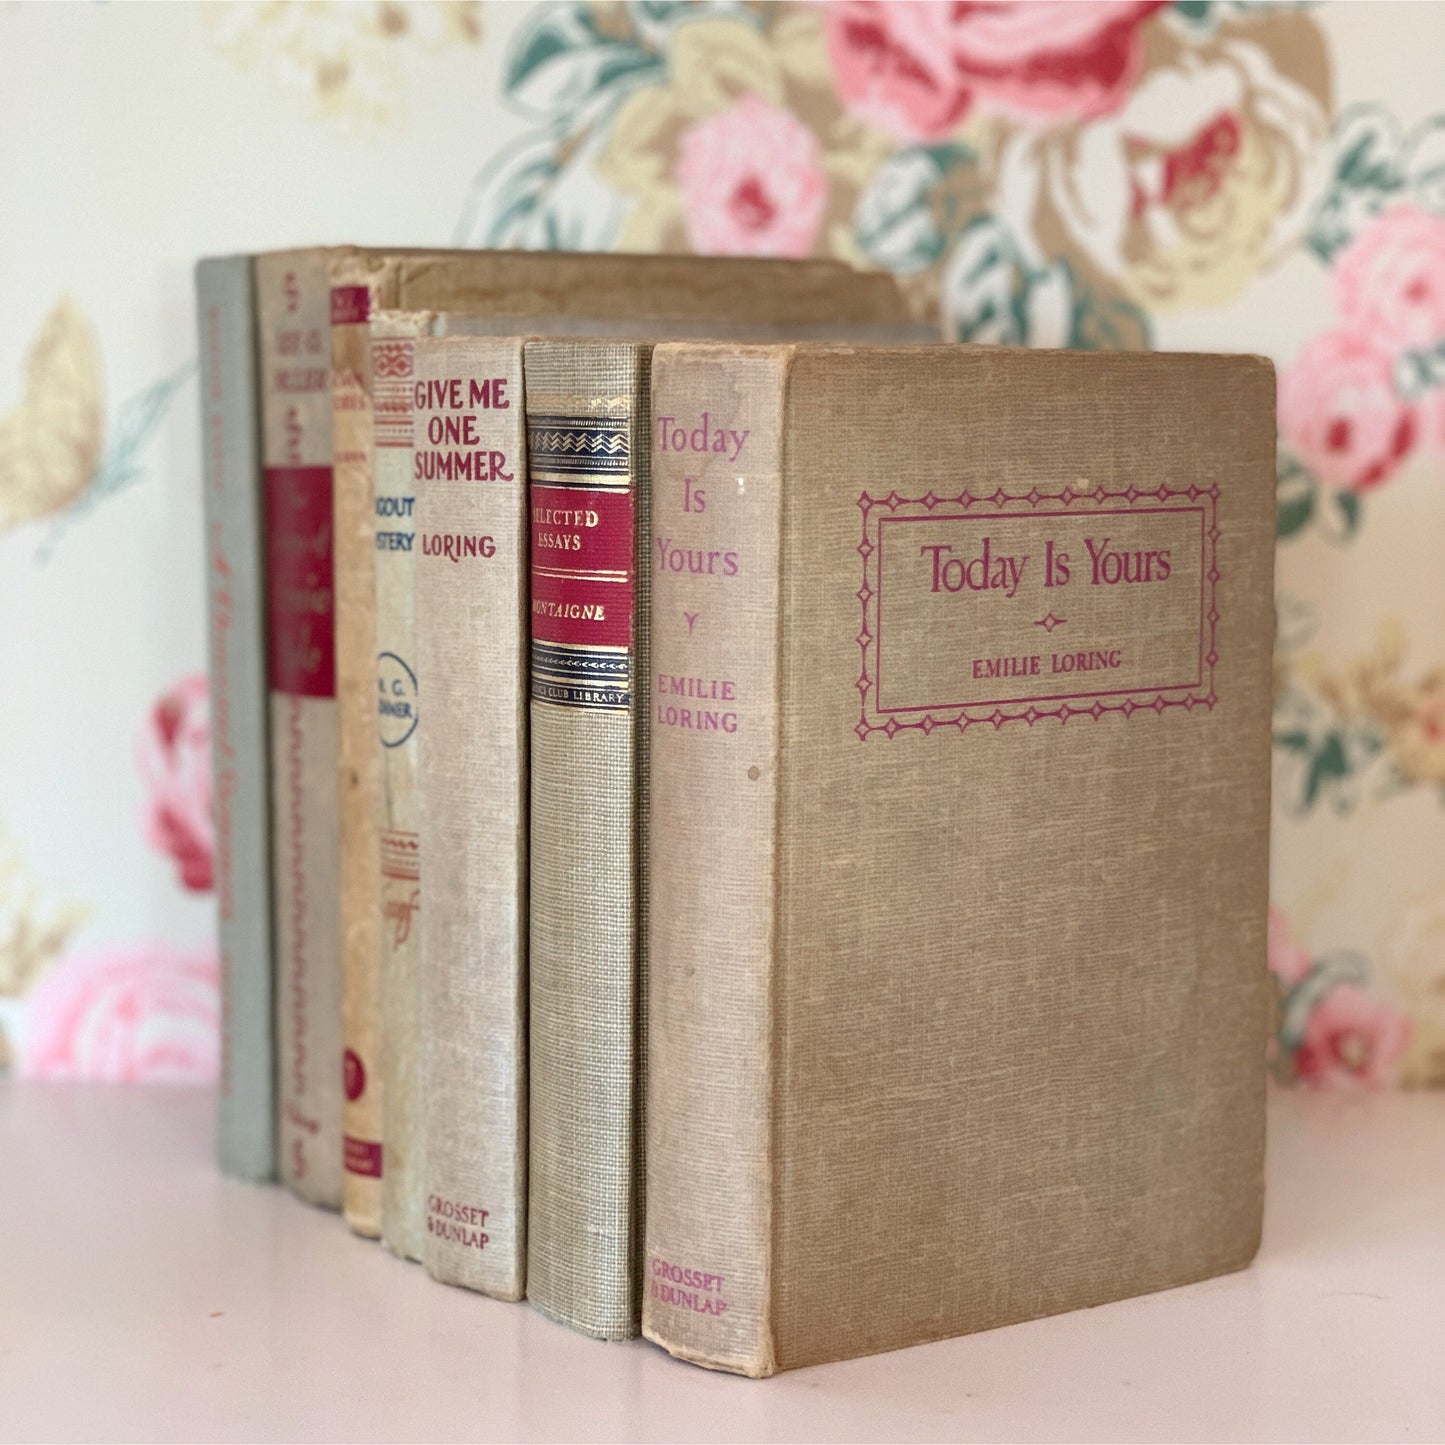 Beige and Red Book Collection, Vintage Decorative Books, Mid-Century Modern